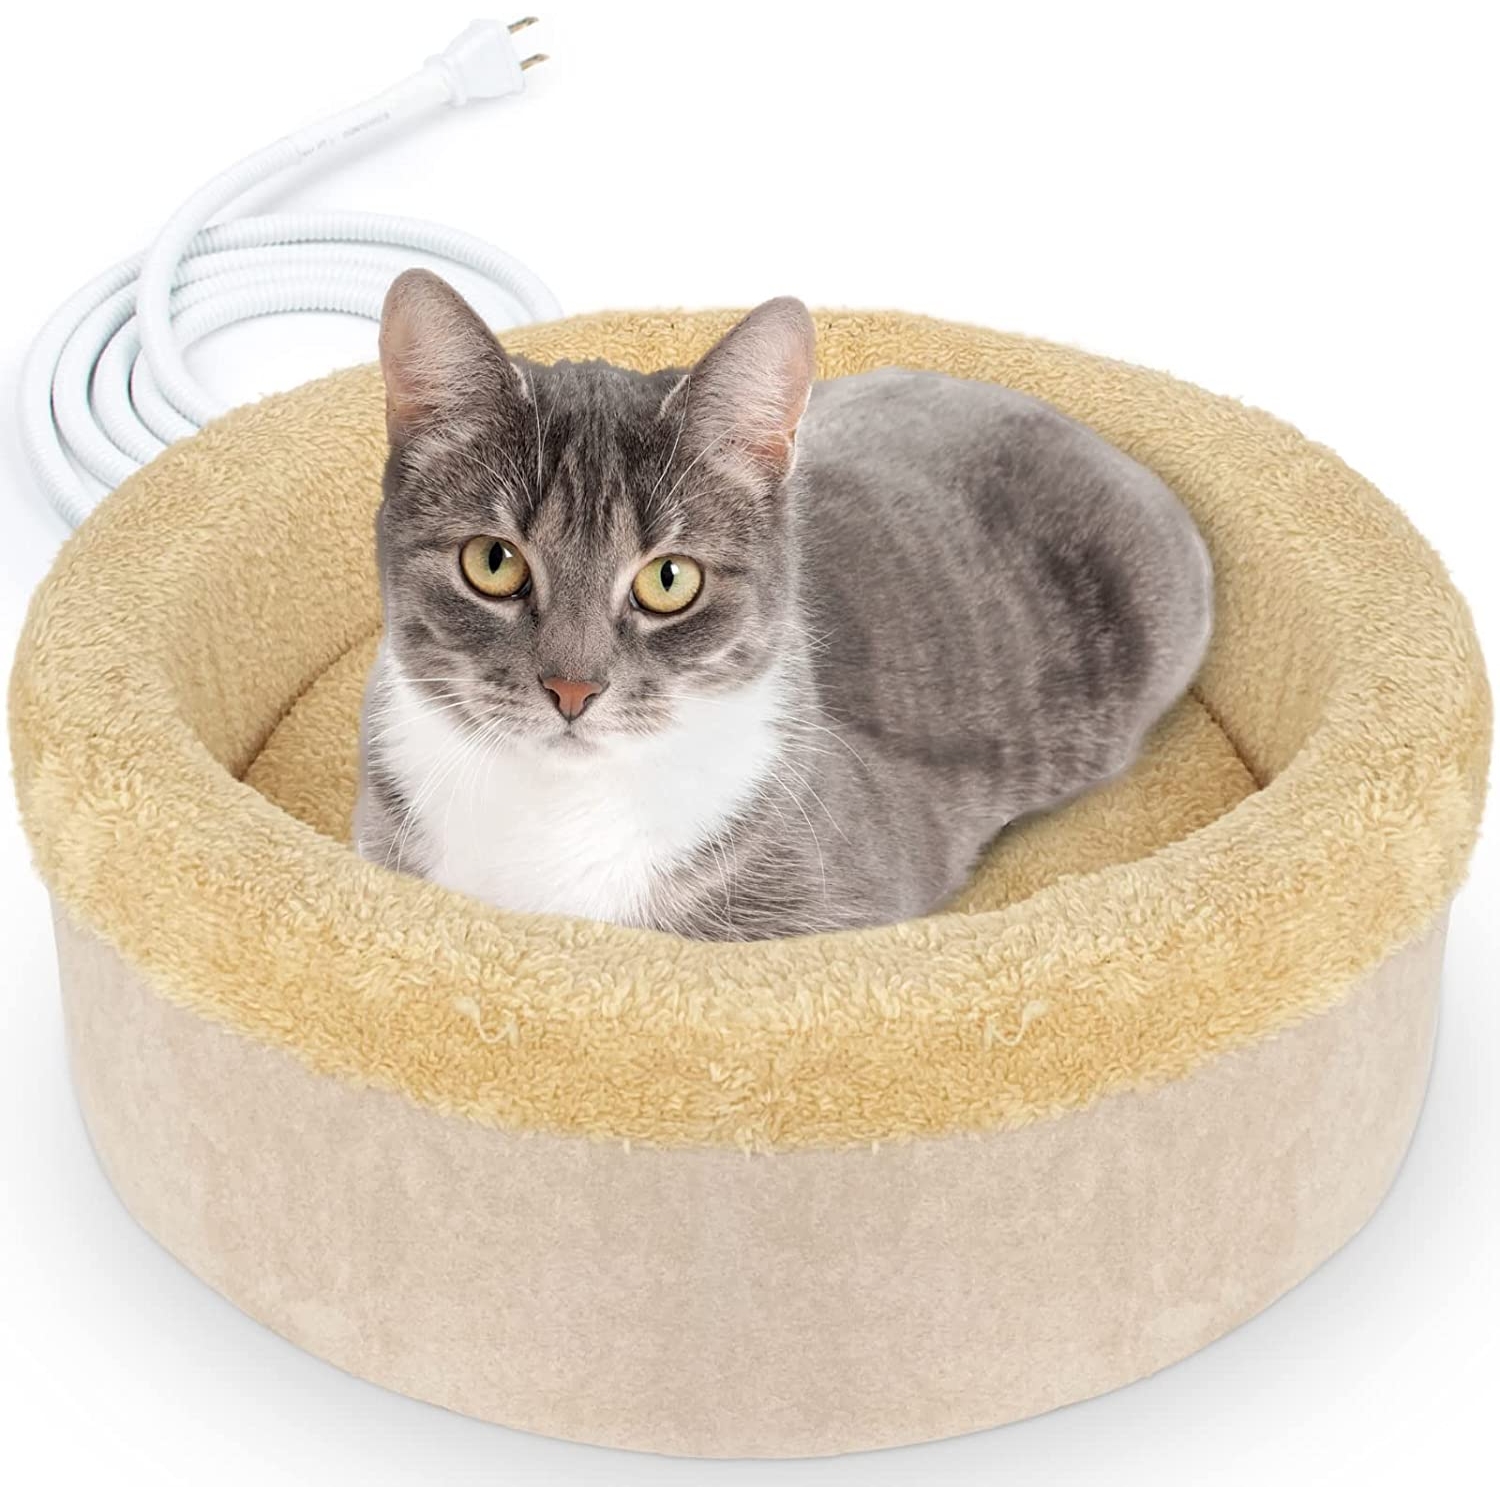 Heated Cat Beds for Indoor Cats Round Warming Cat Beds Super Soft Machine Washable Thermo Kitty Electric Heating Bed